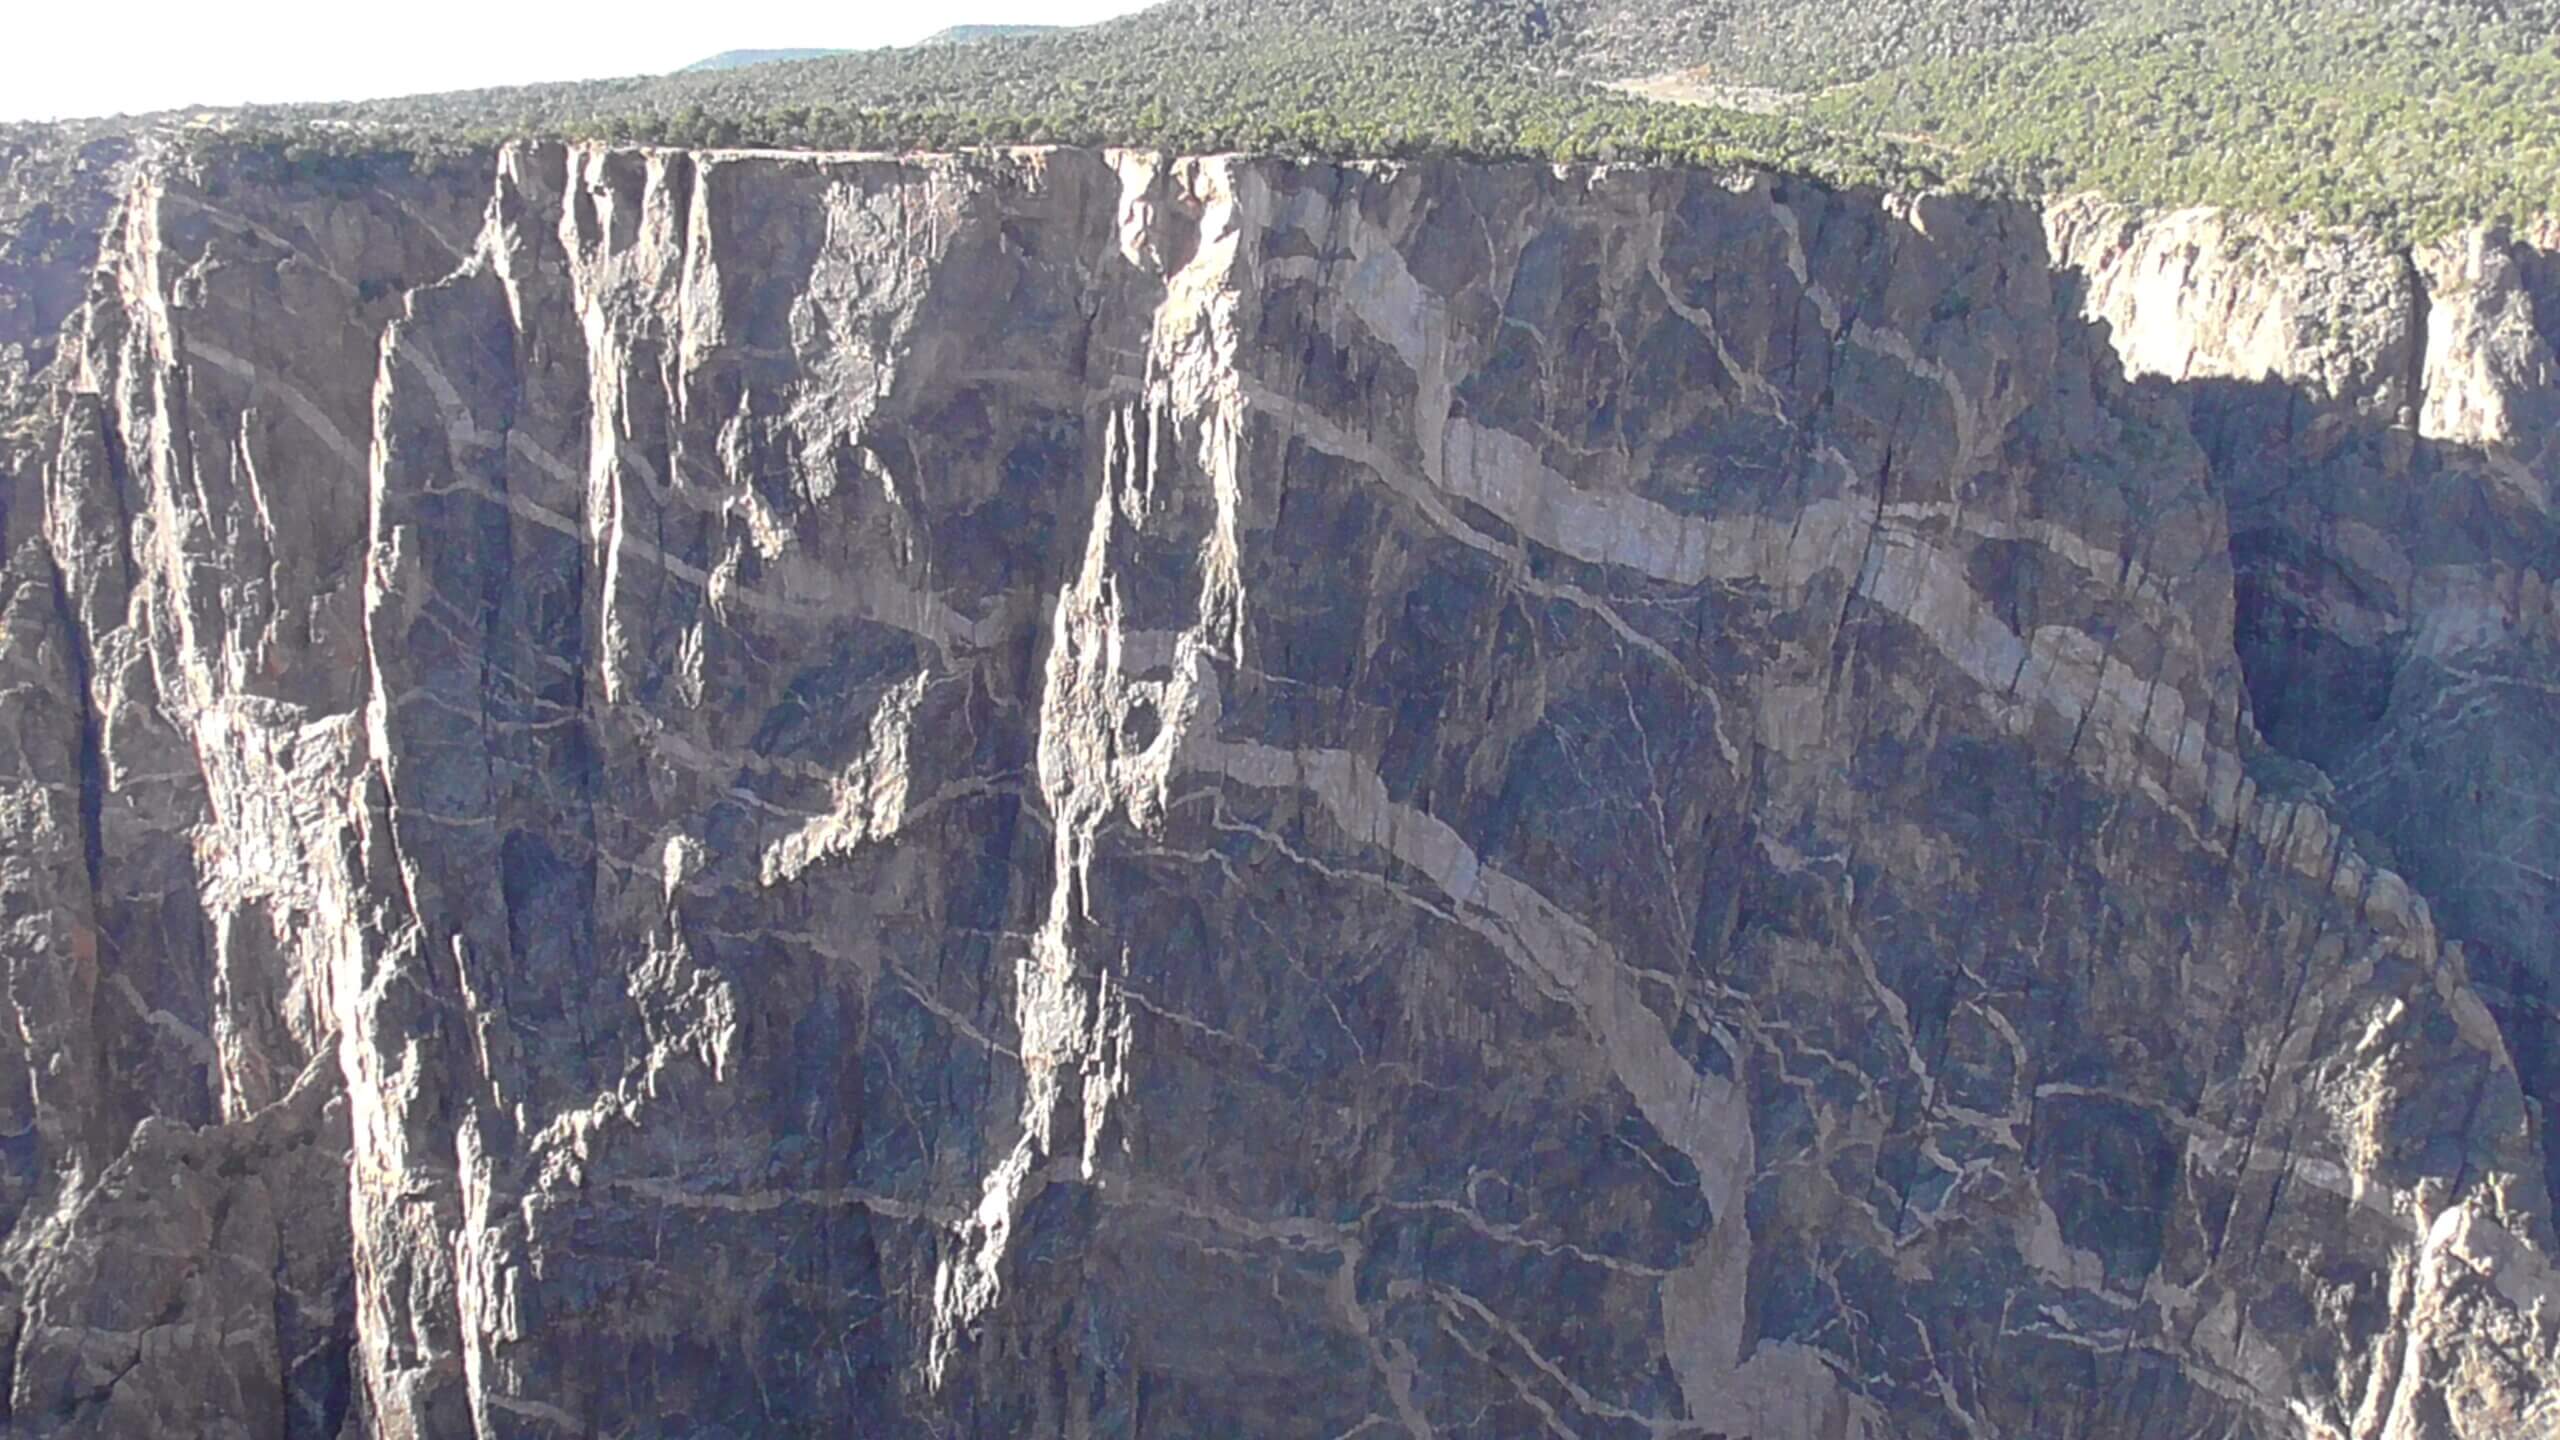 Painted Wall,  Black Canyon of the Gunnison National Park